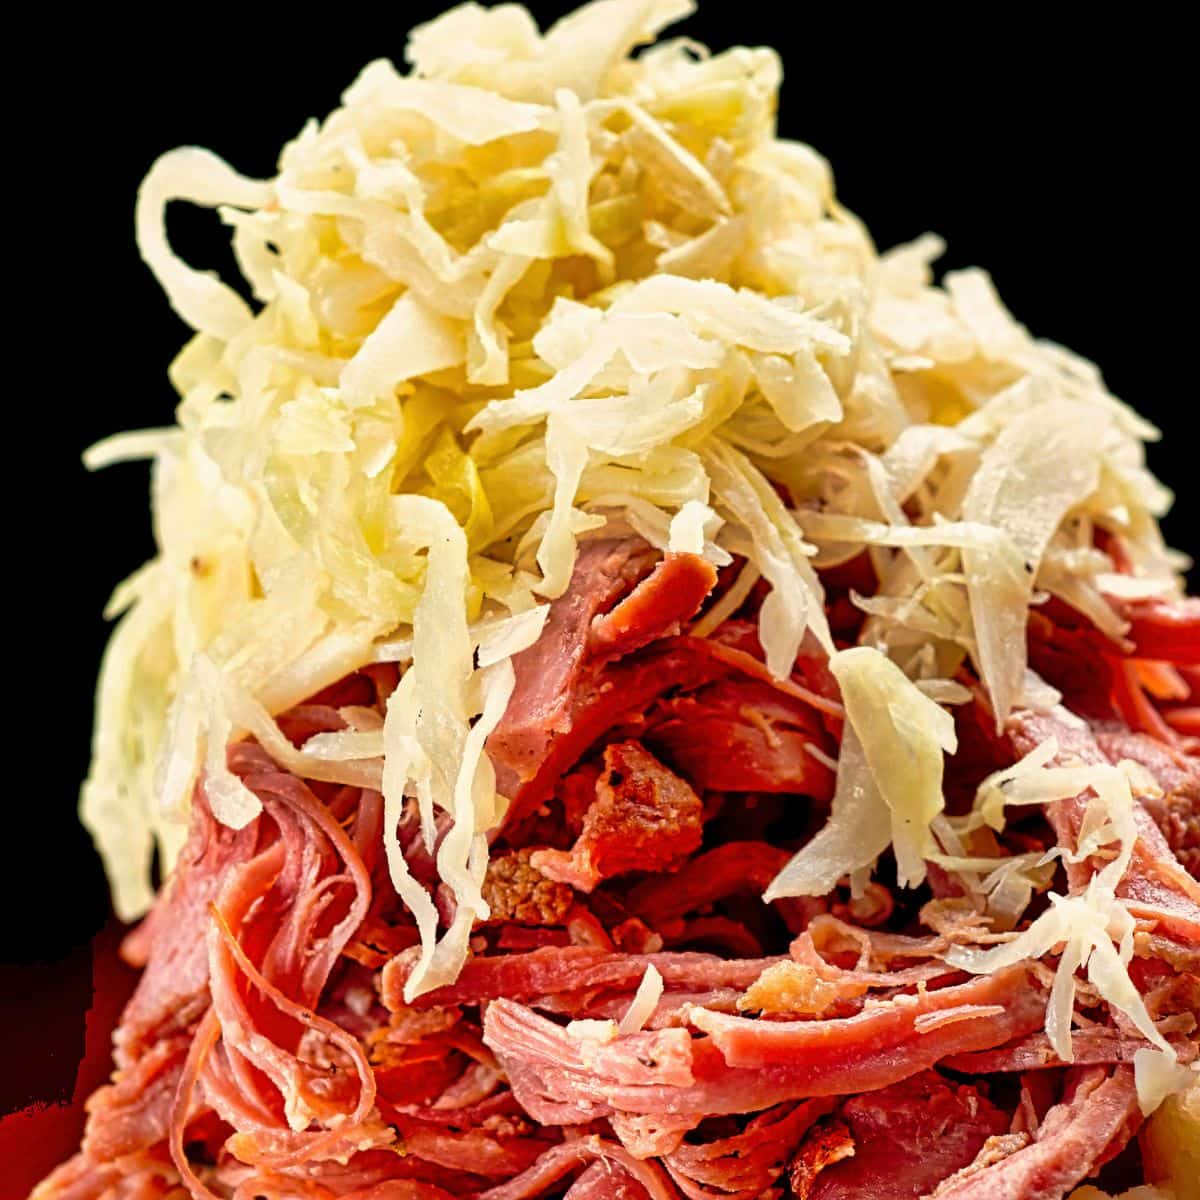 4. Slow Cooker Italian Beef and Cabbage - Italian Beef Recipes In Crock Pot